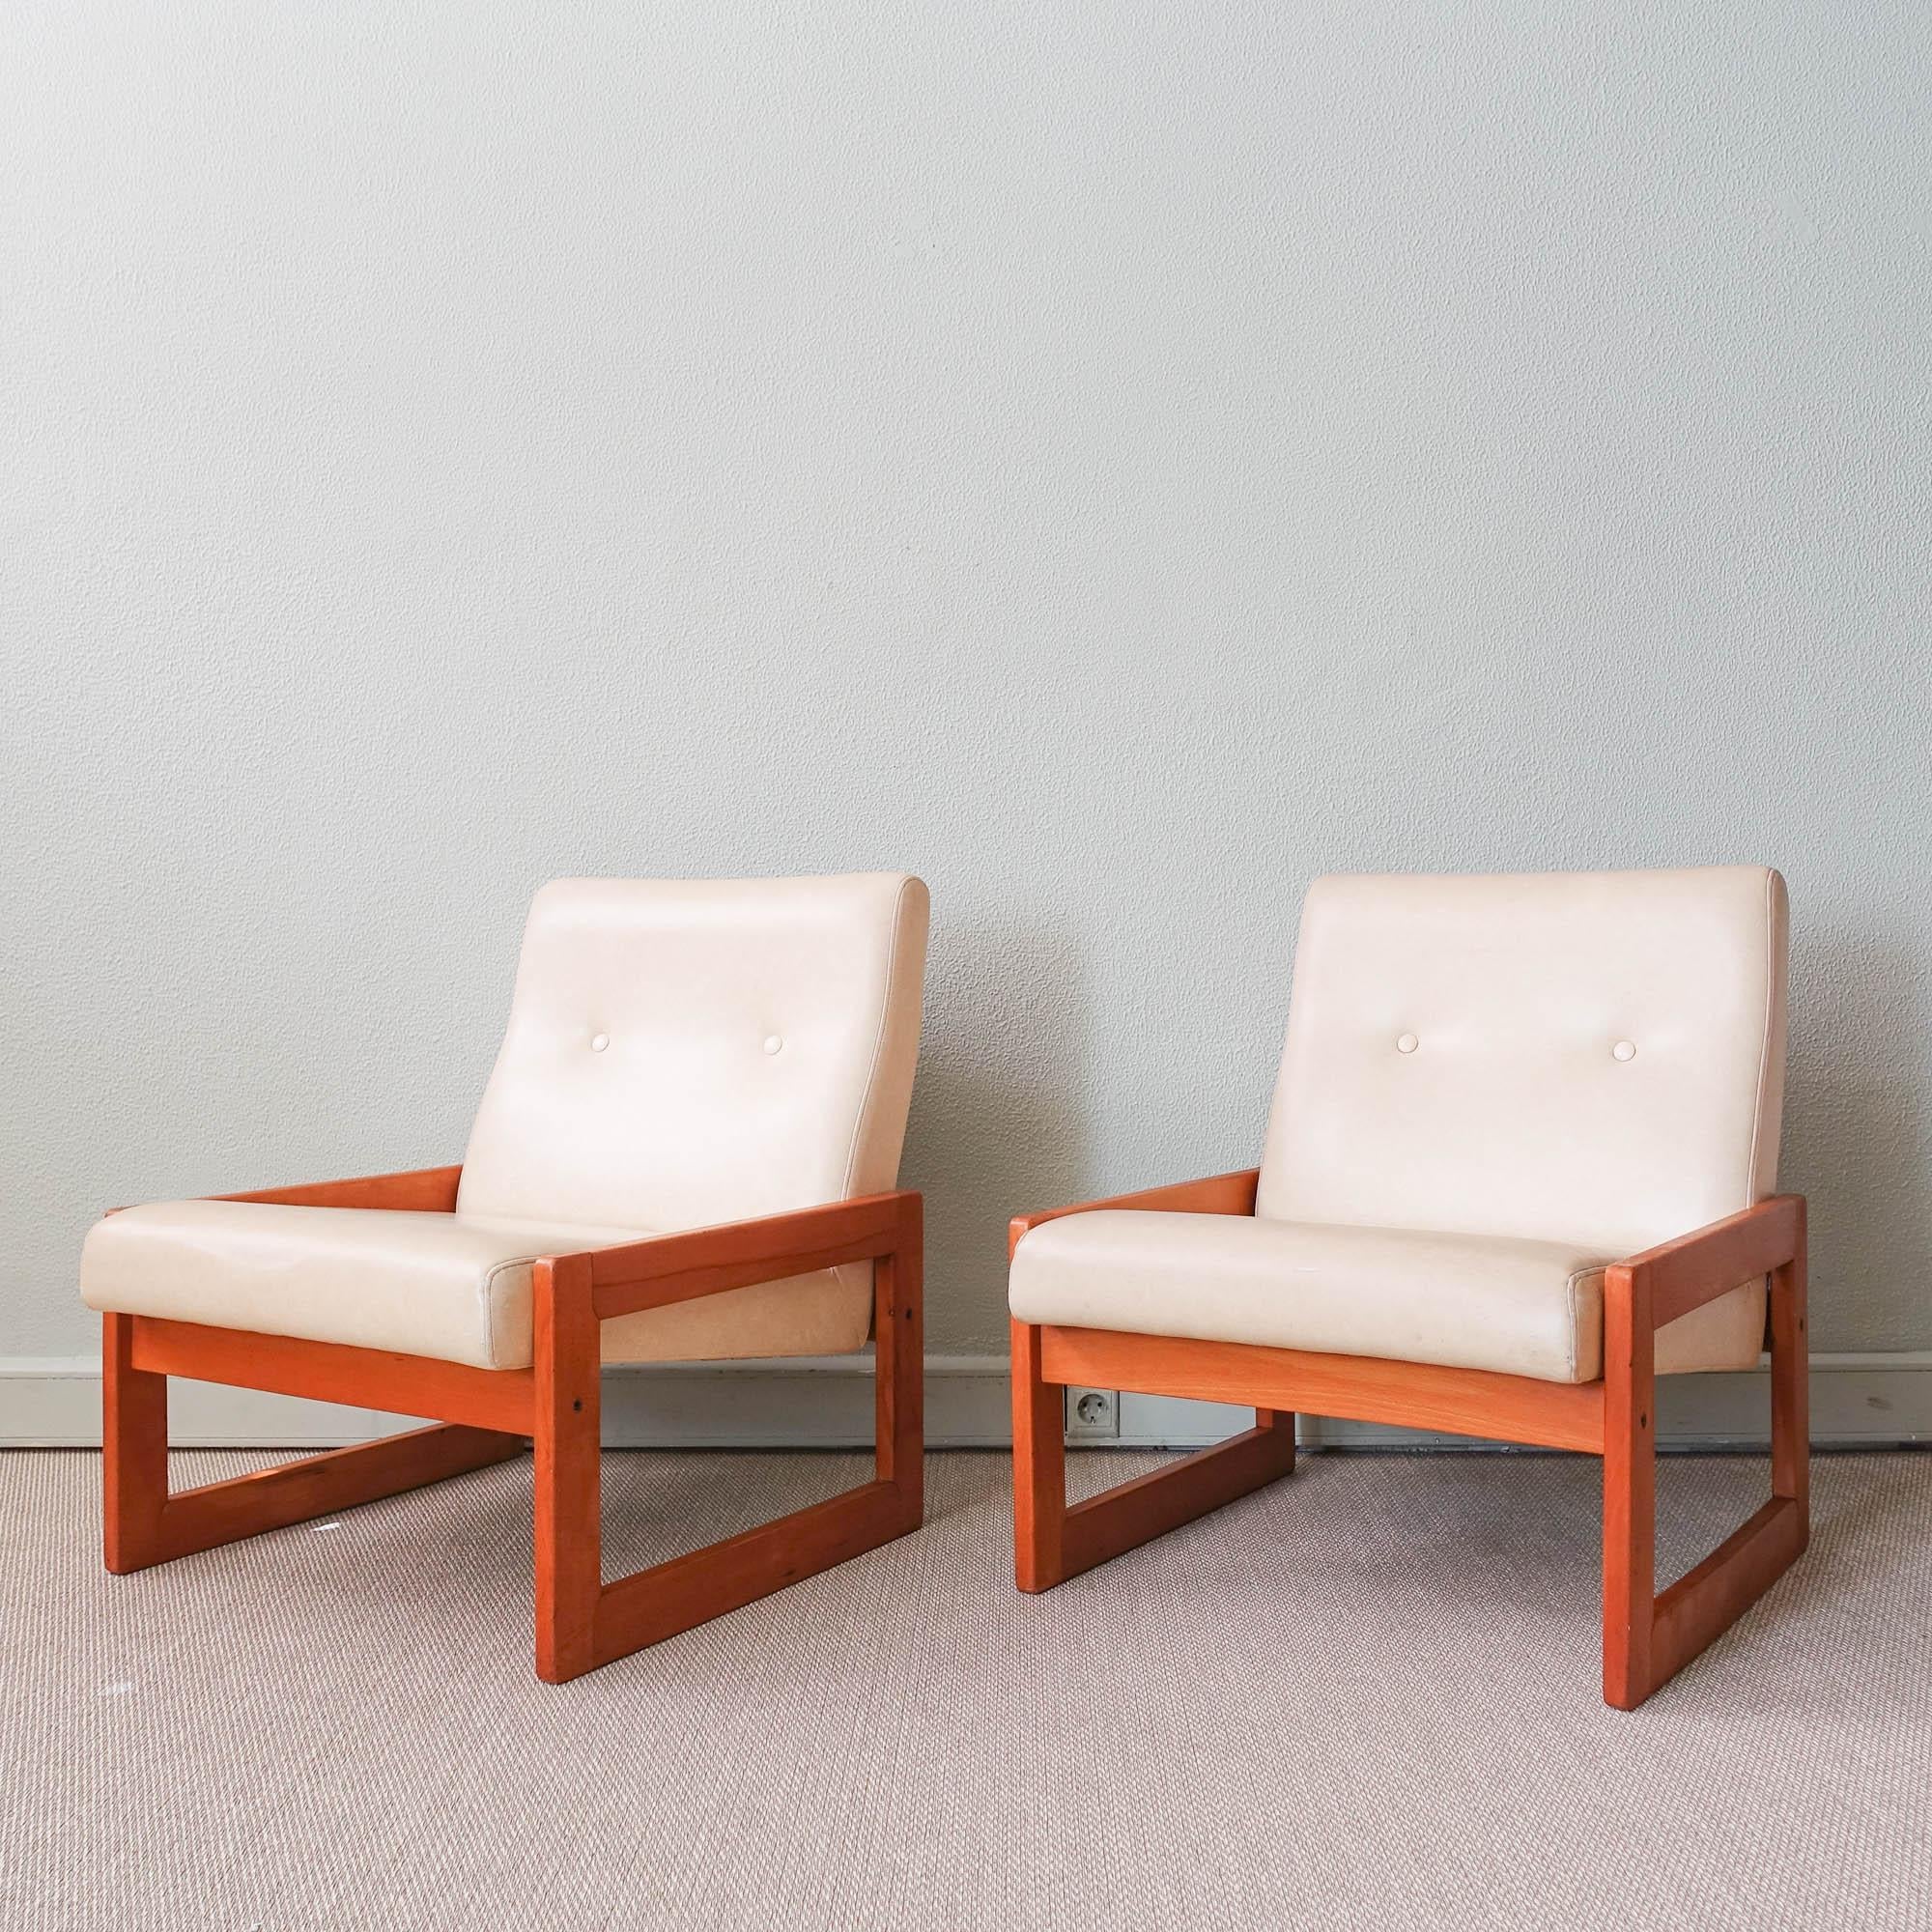 This pair of easy chairs, model Espinho, was designed by José Espinho for Olaio, in Portugal in 1973. The geometrical wood structure has clean and simple lines, where a upholstered white faux leather seat is set. They are in original and good